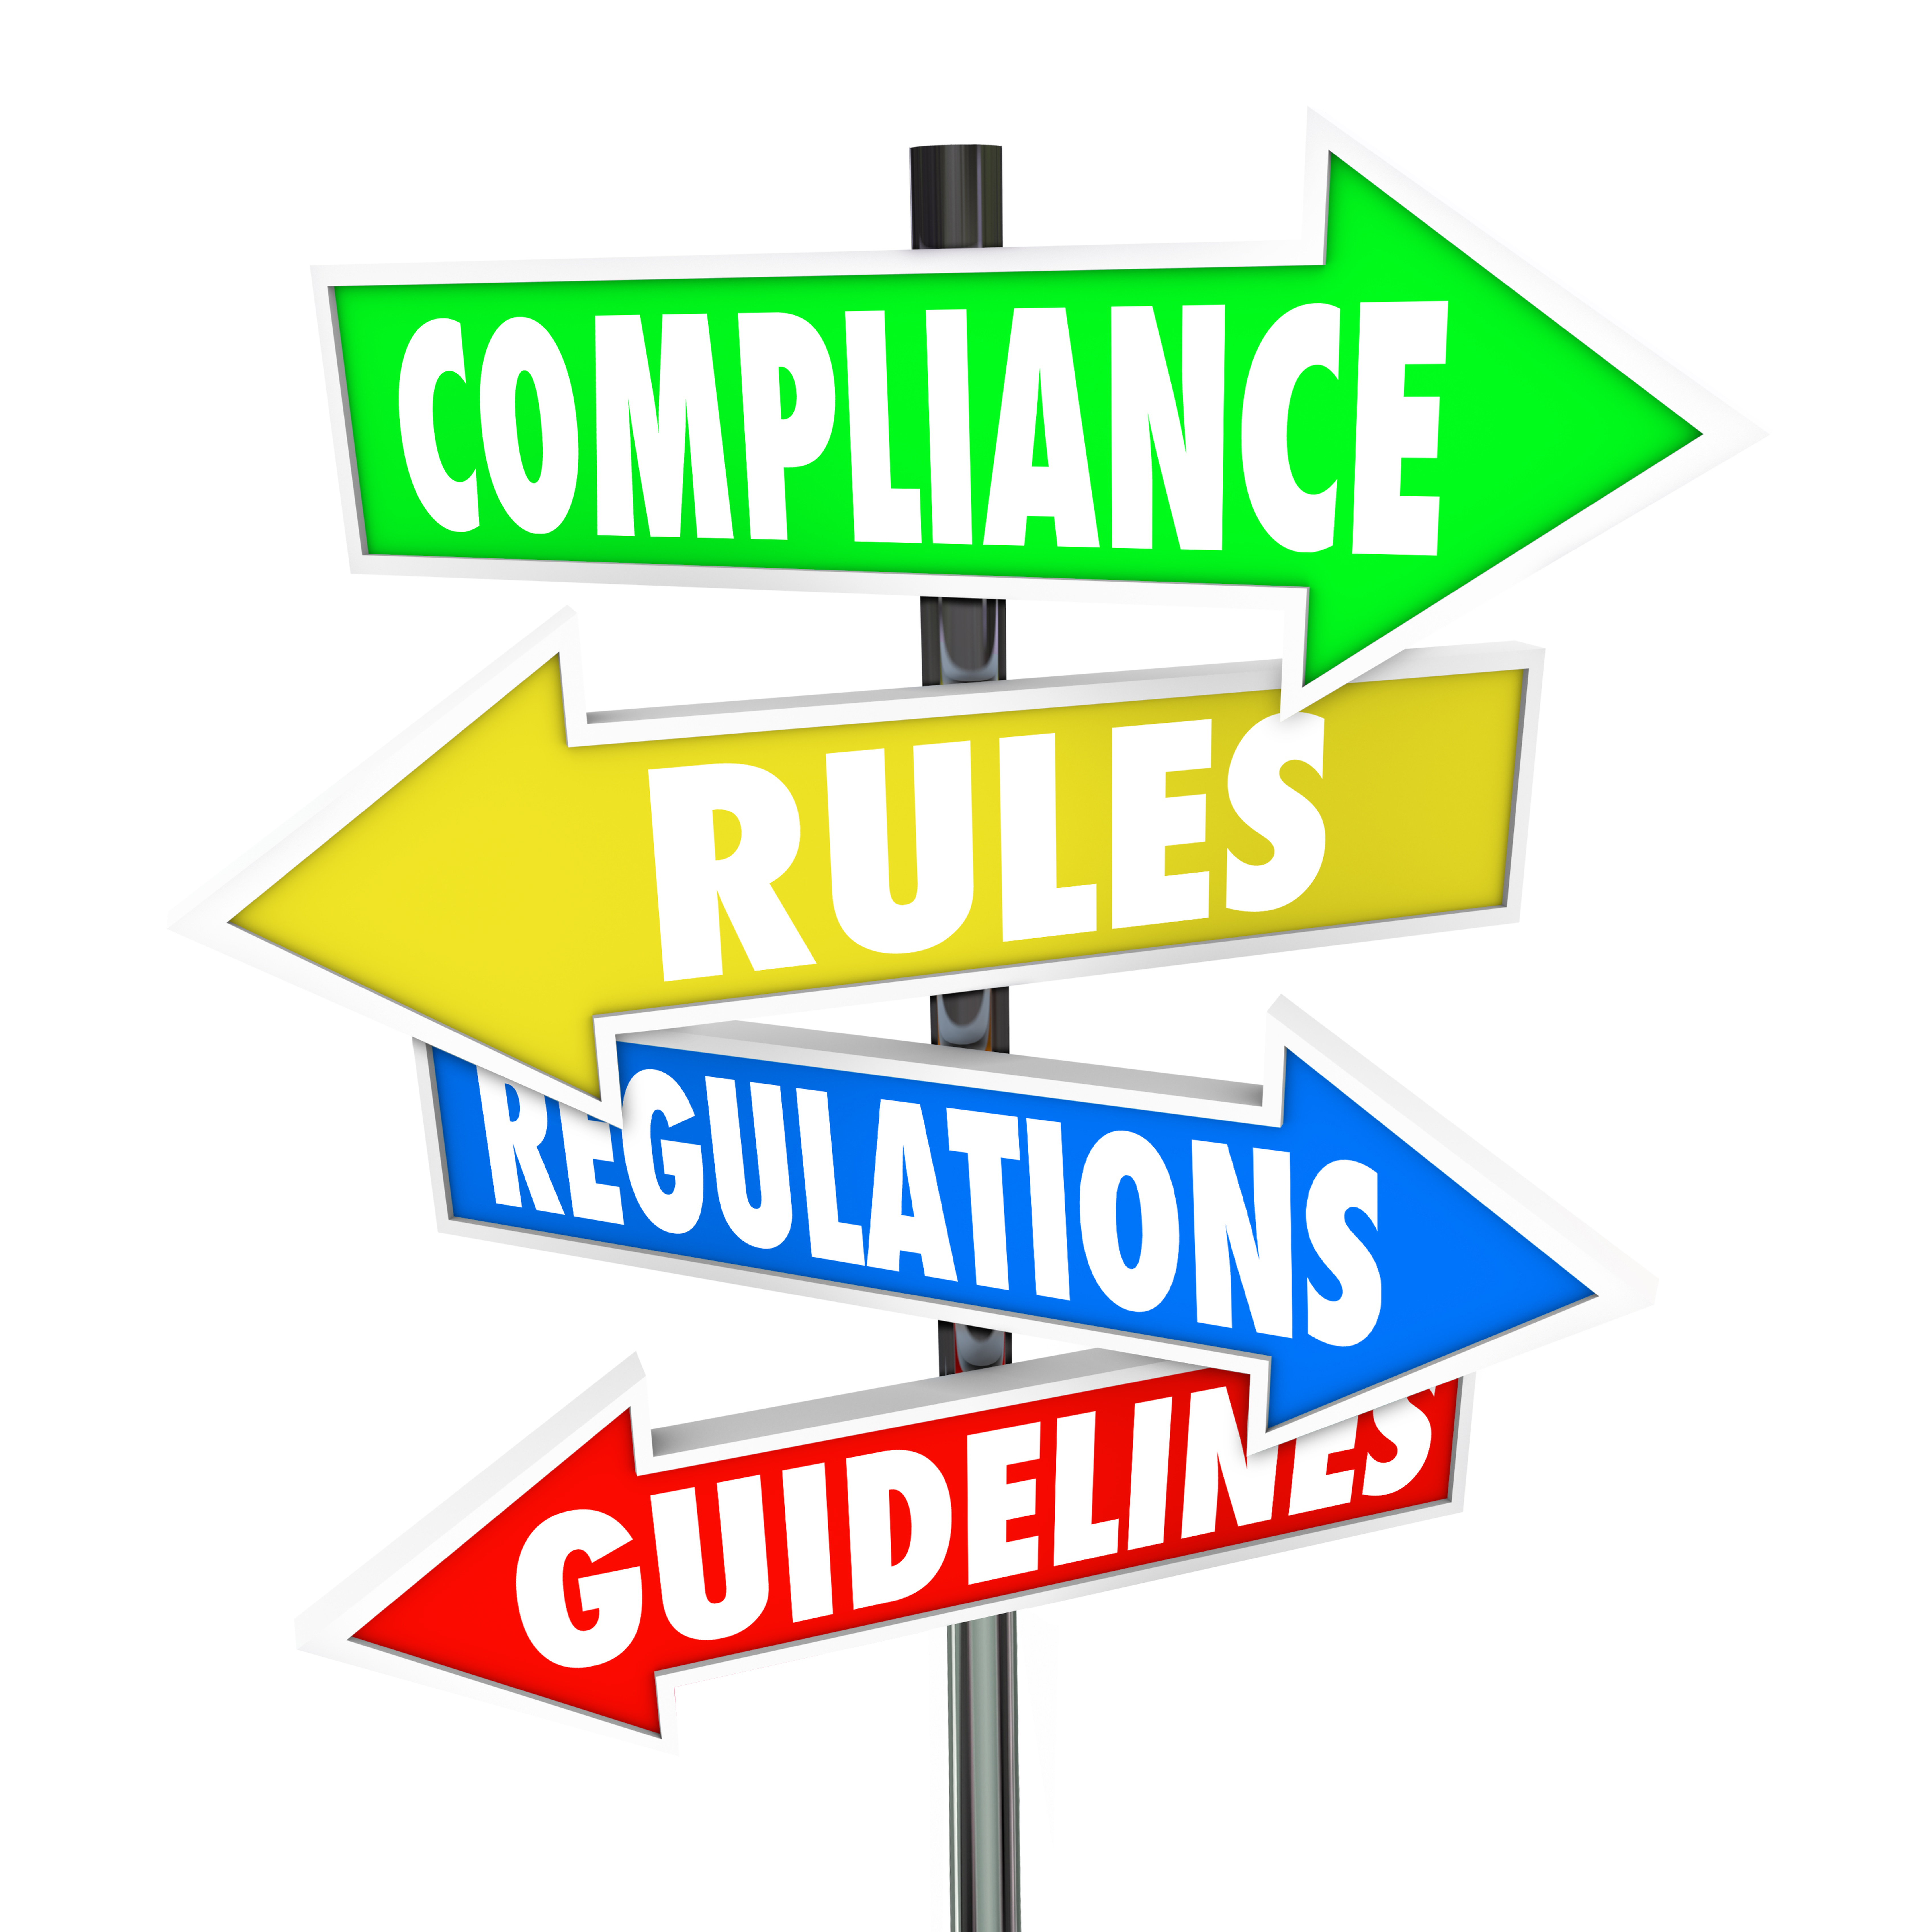 Street sign with arrows pointing multiple directions. The arrow read "Compliance," "Rules," "Regulations," "Guidelines"